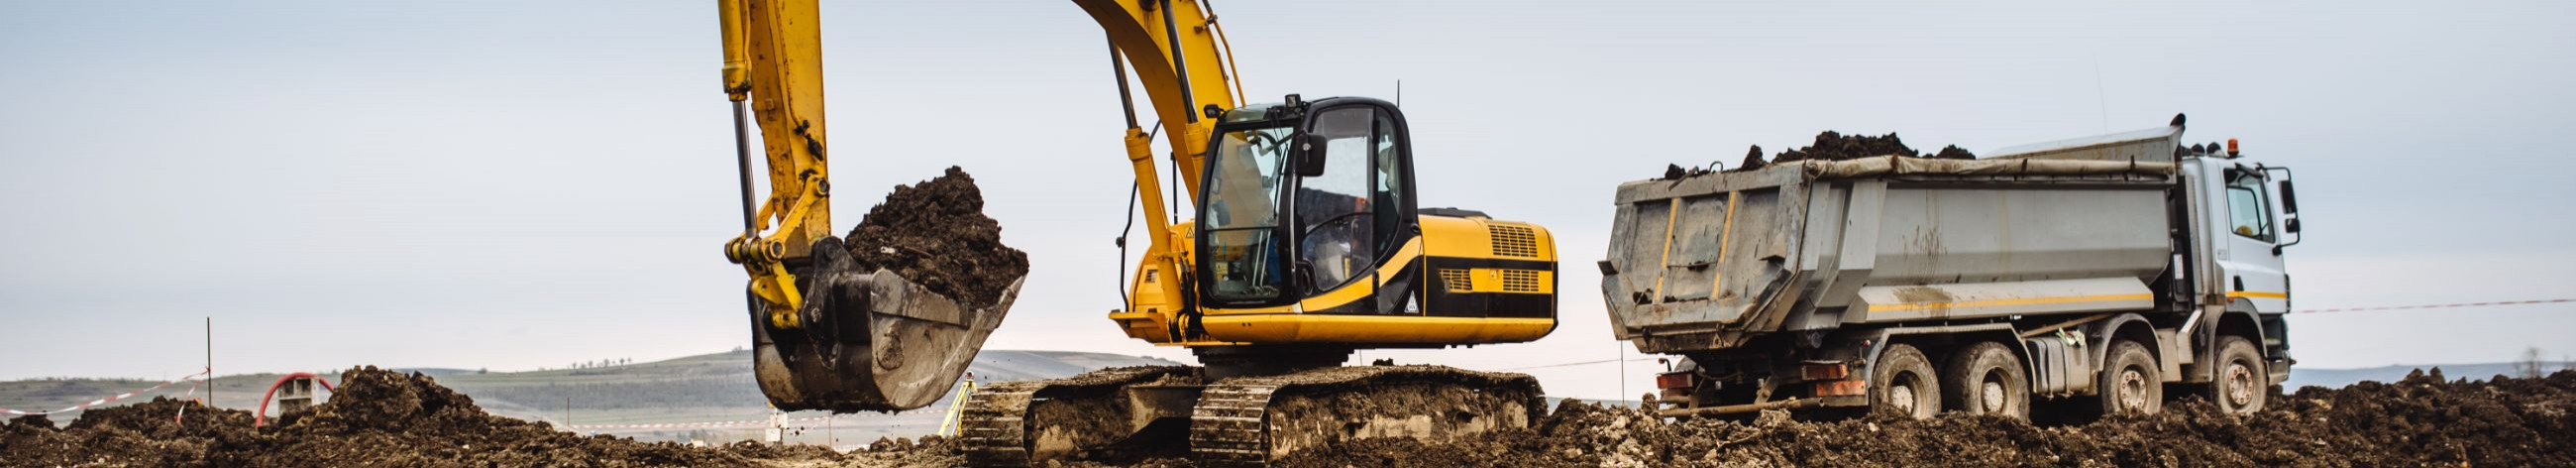 management of career plans, Transport Service, construction material transport, transport of heavy machinery, excavation and soil work, restoration of career